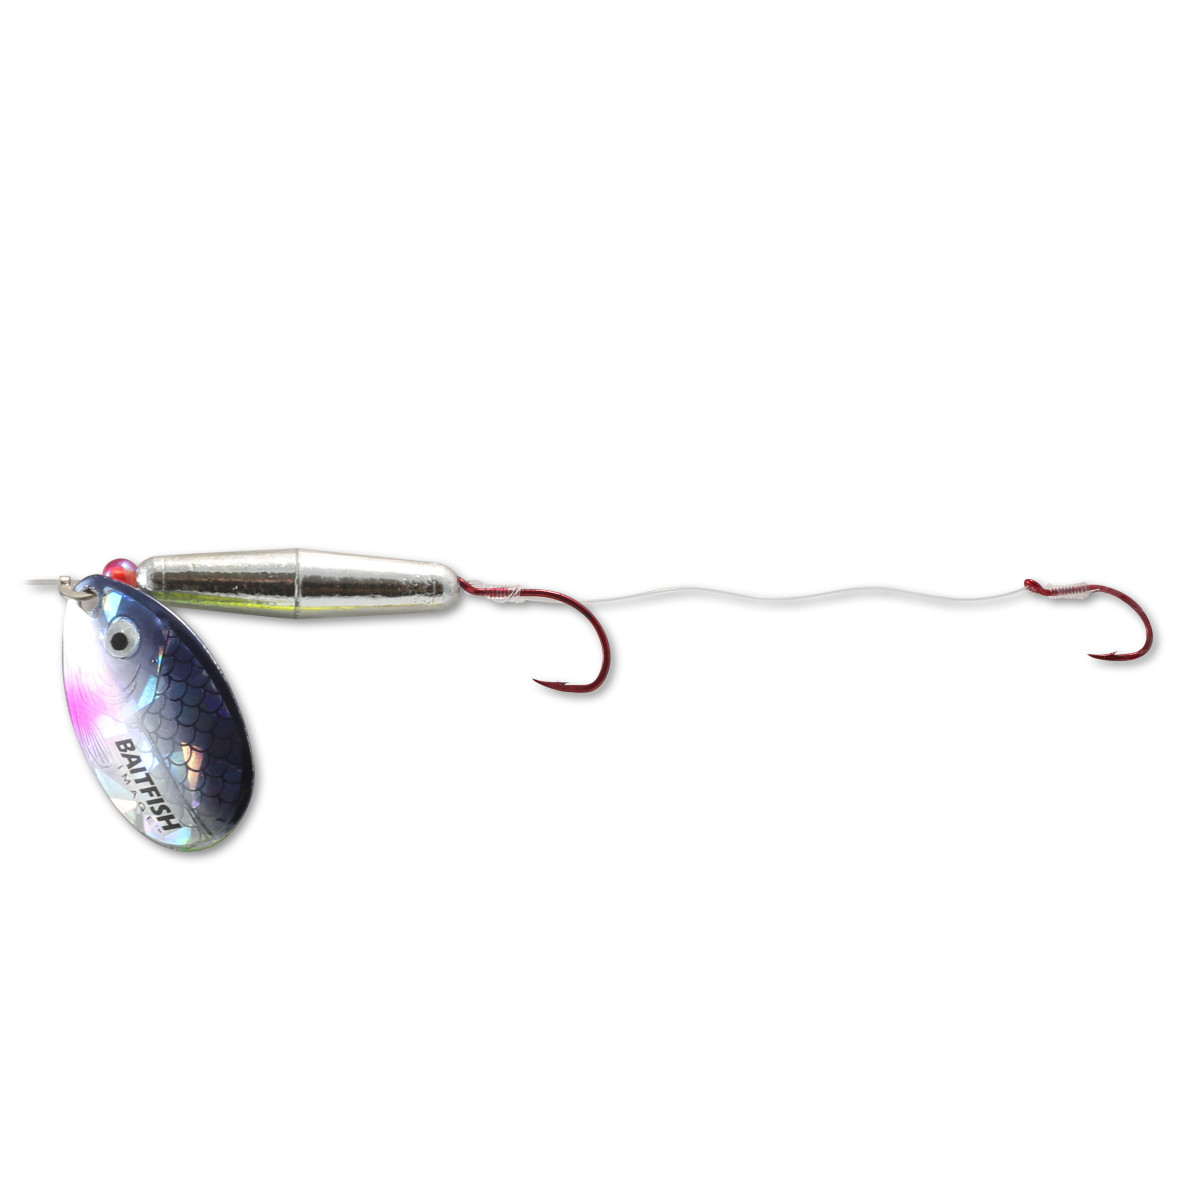 Falcon Tackle Rig Floats in Chartreuse/Lime, Size 5/8 from The Fishin' Hole